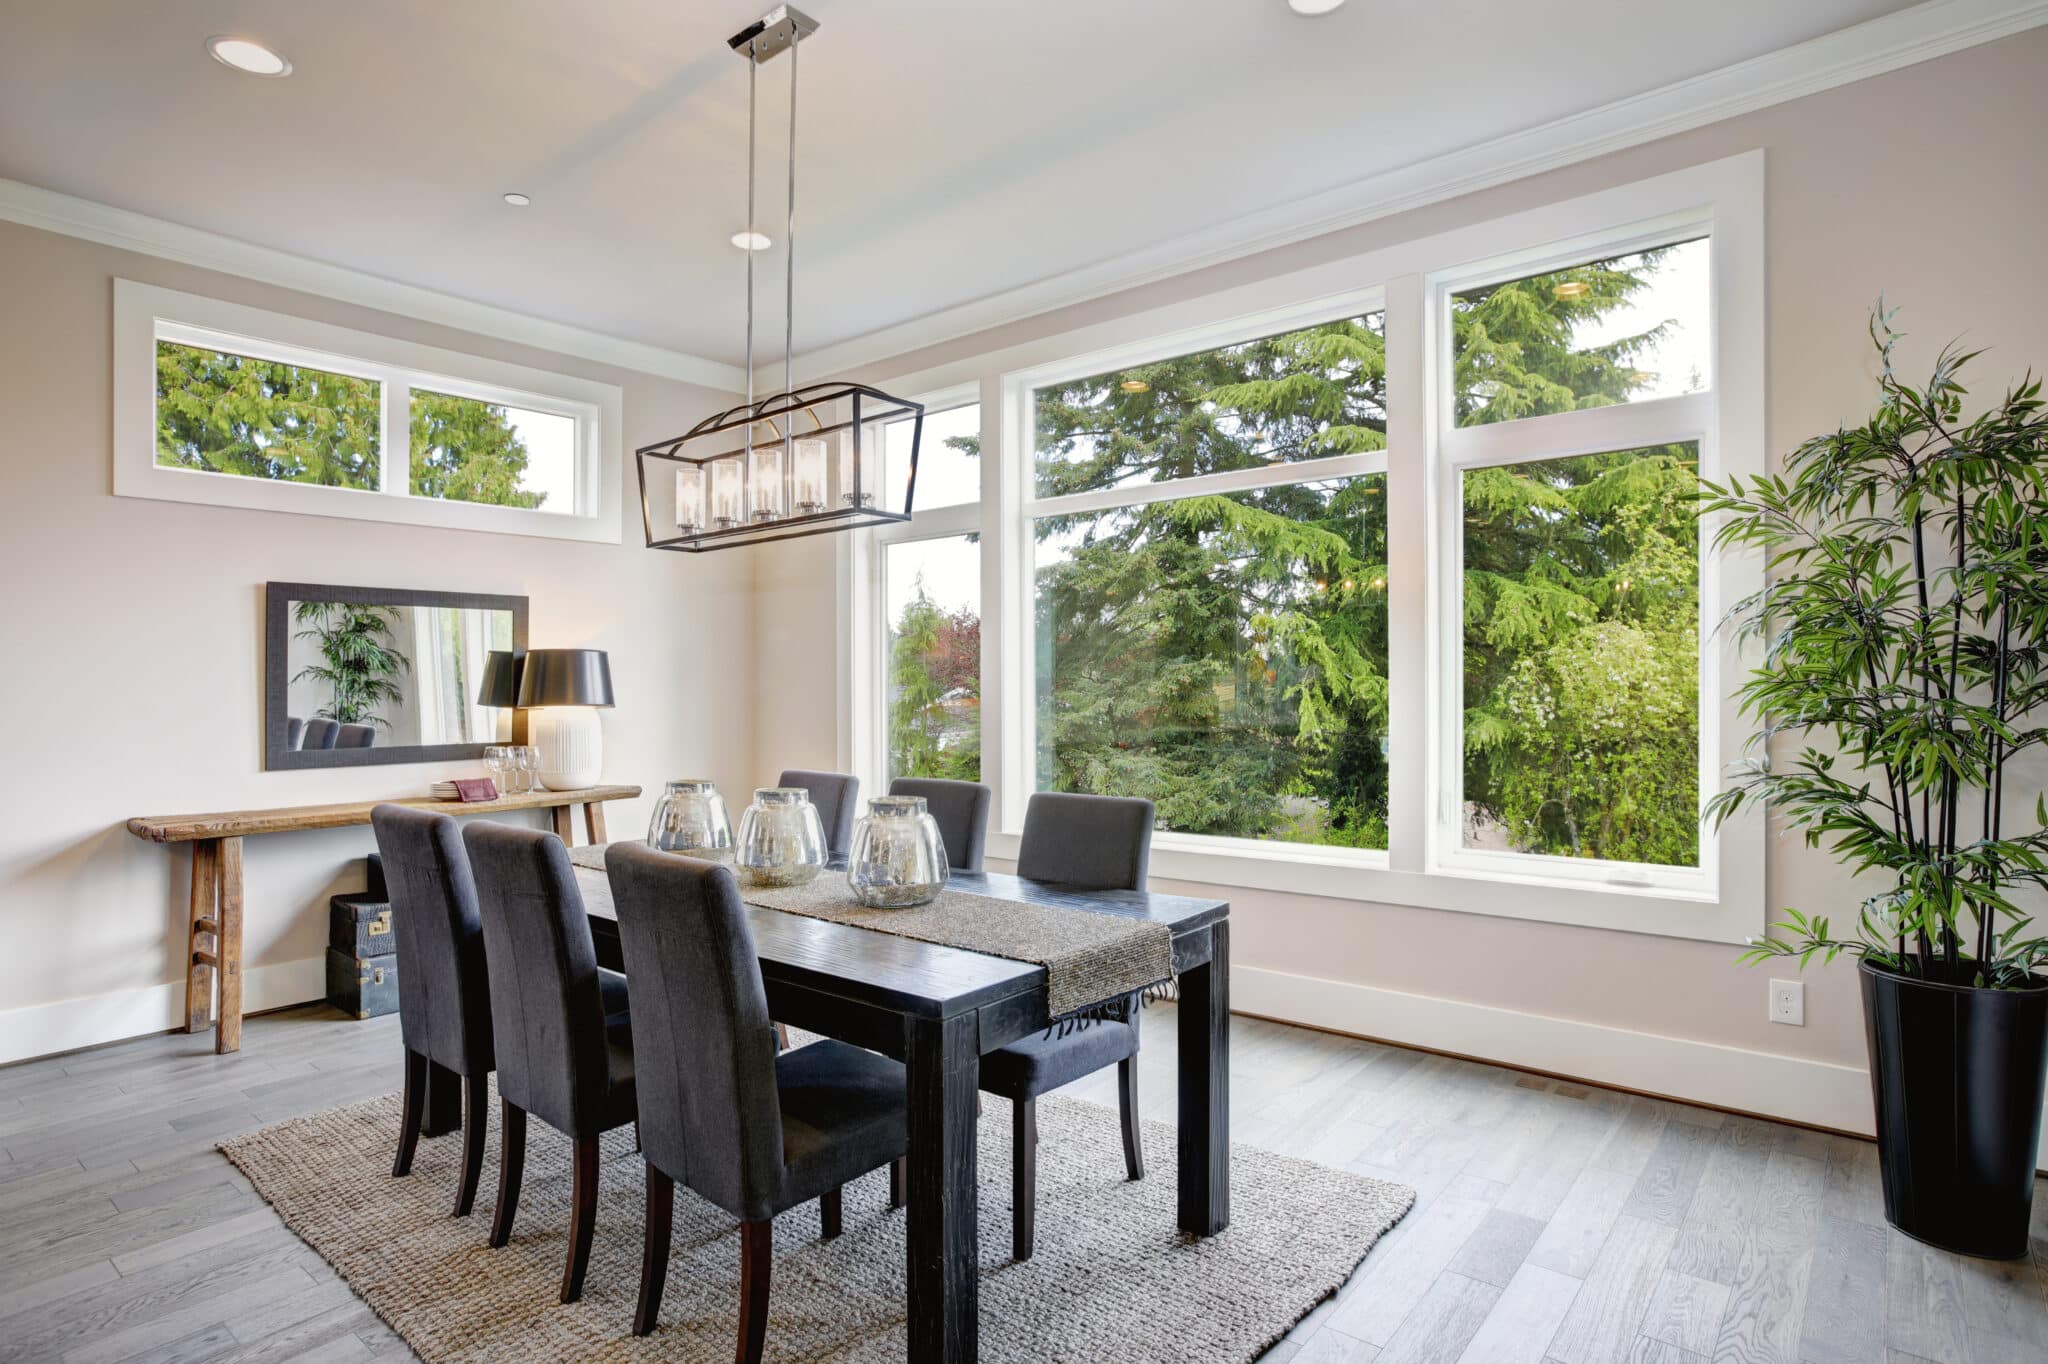 5 Dining Room Chandeliers That Look Great & Save Energy